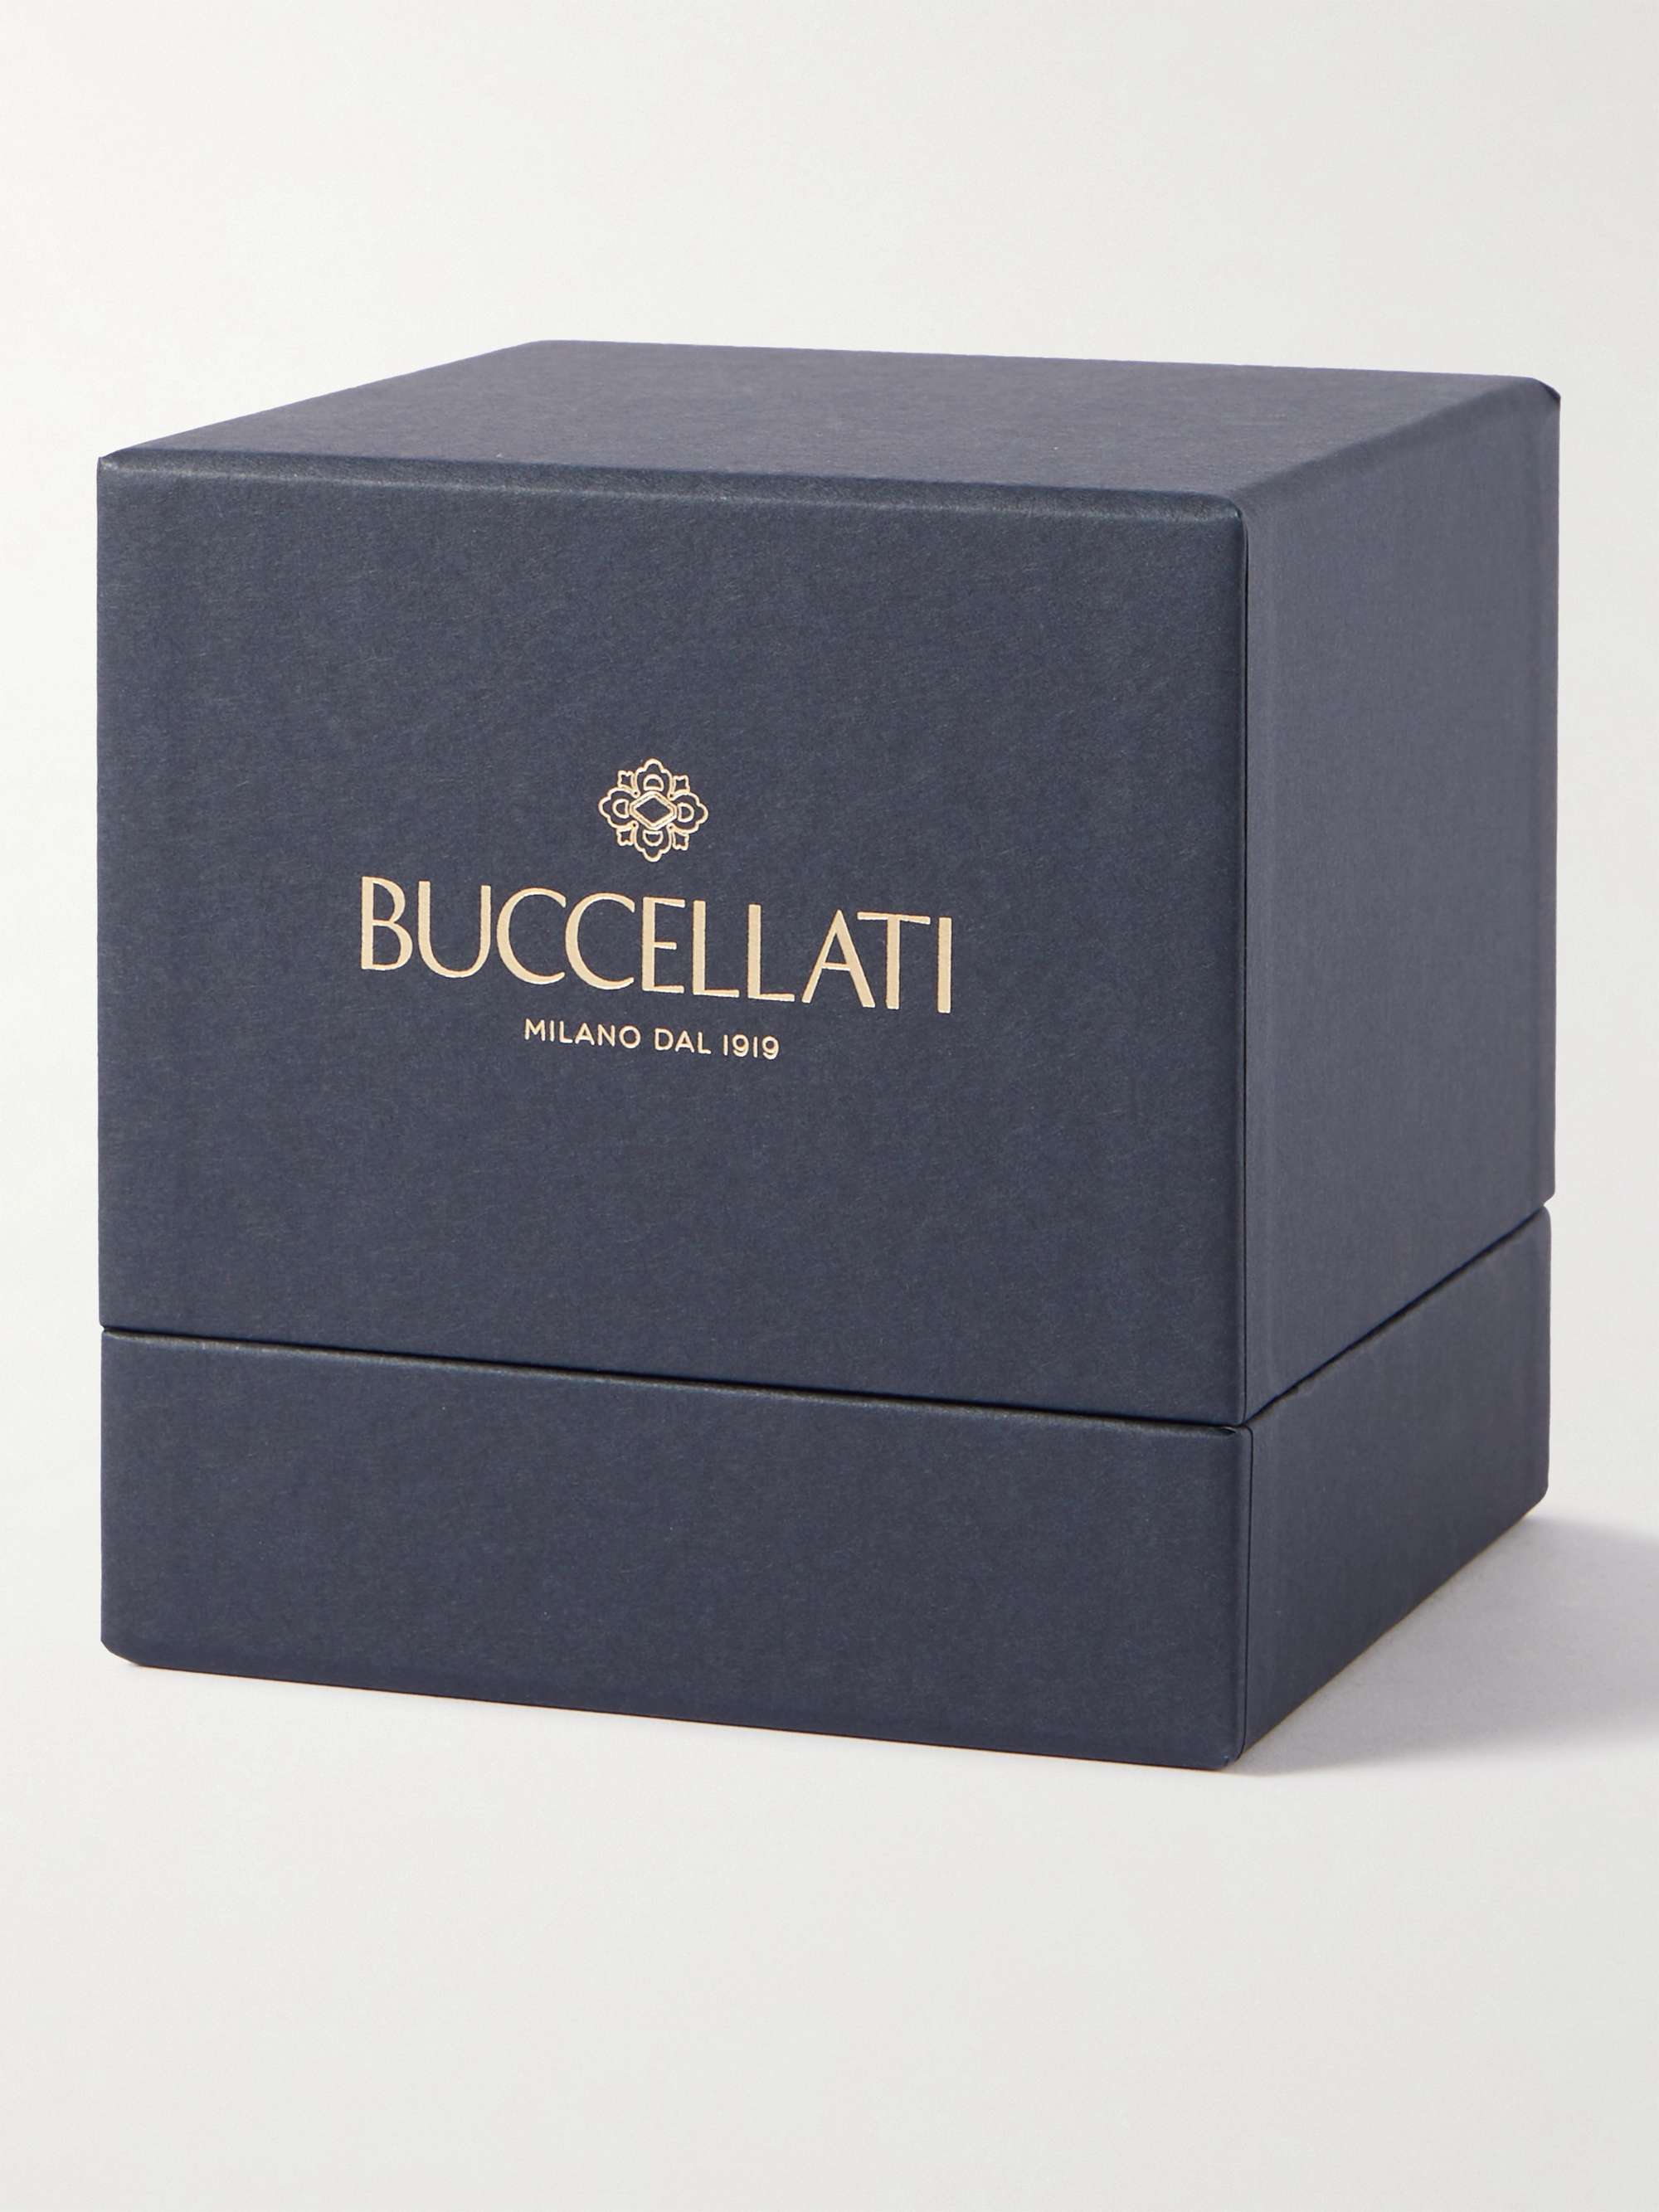 BUCCELLATI Scented Candle and Sterling Silver Candlestick Set